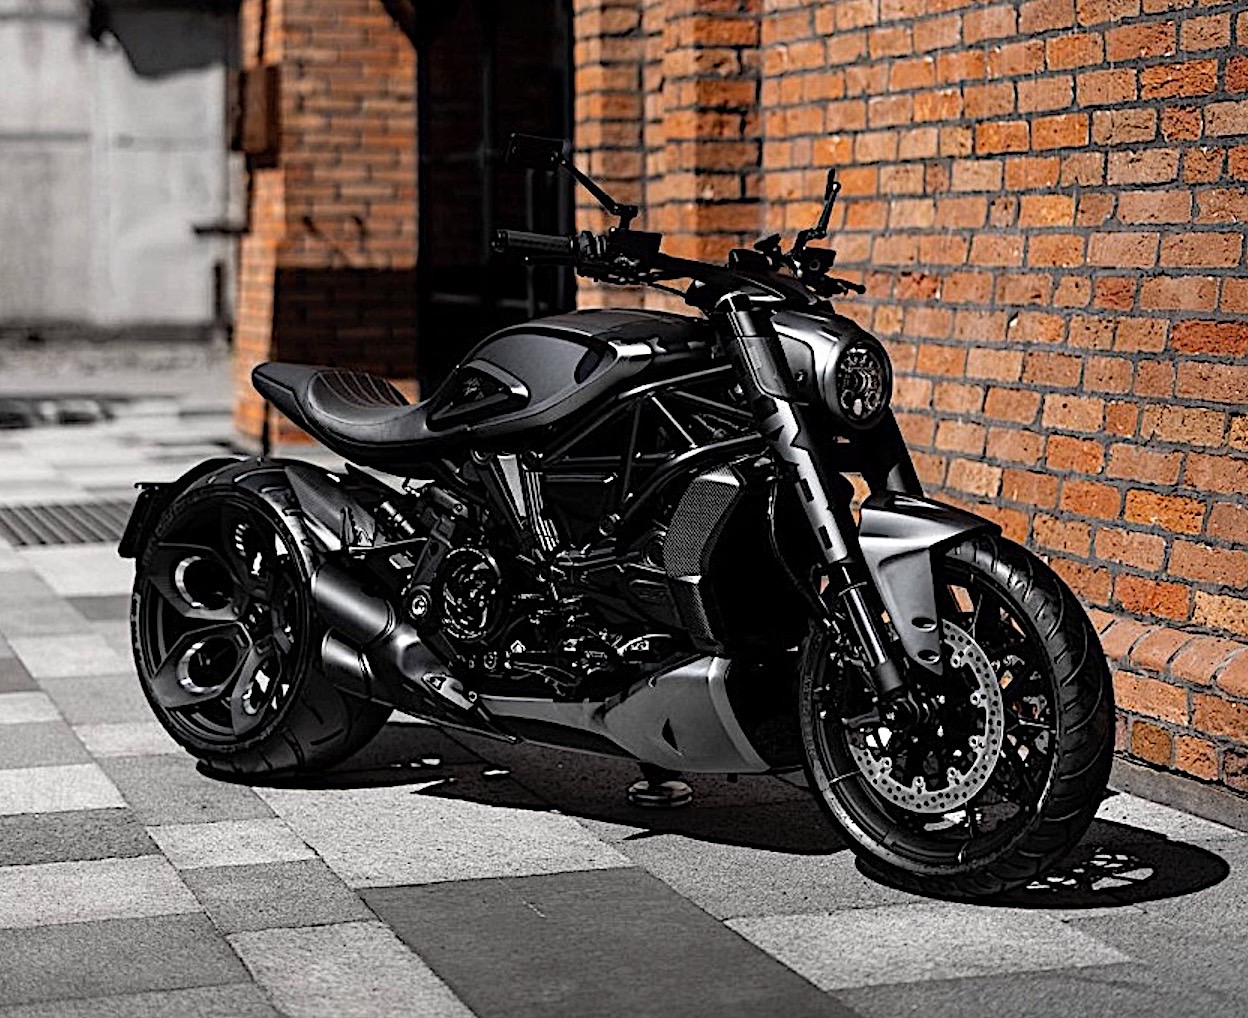 Ducati XDiavel Piombo-X Is Hardcore as Only a Russian Harley